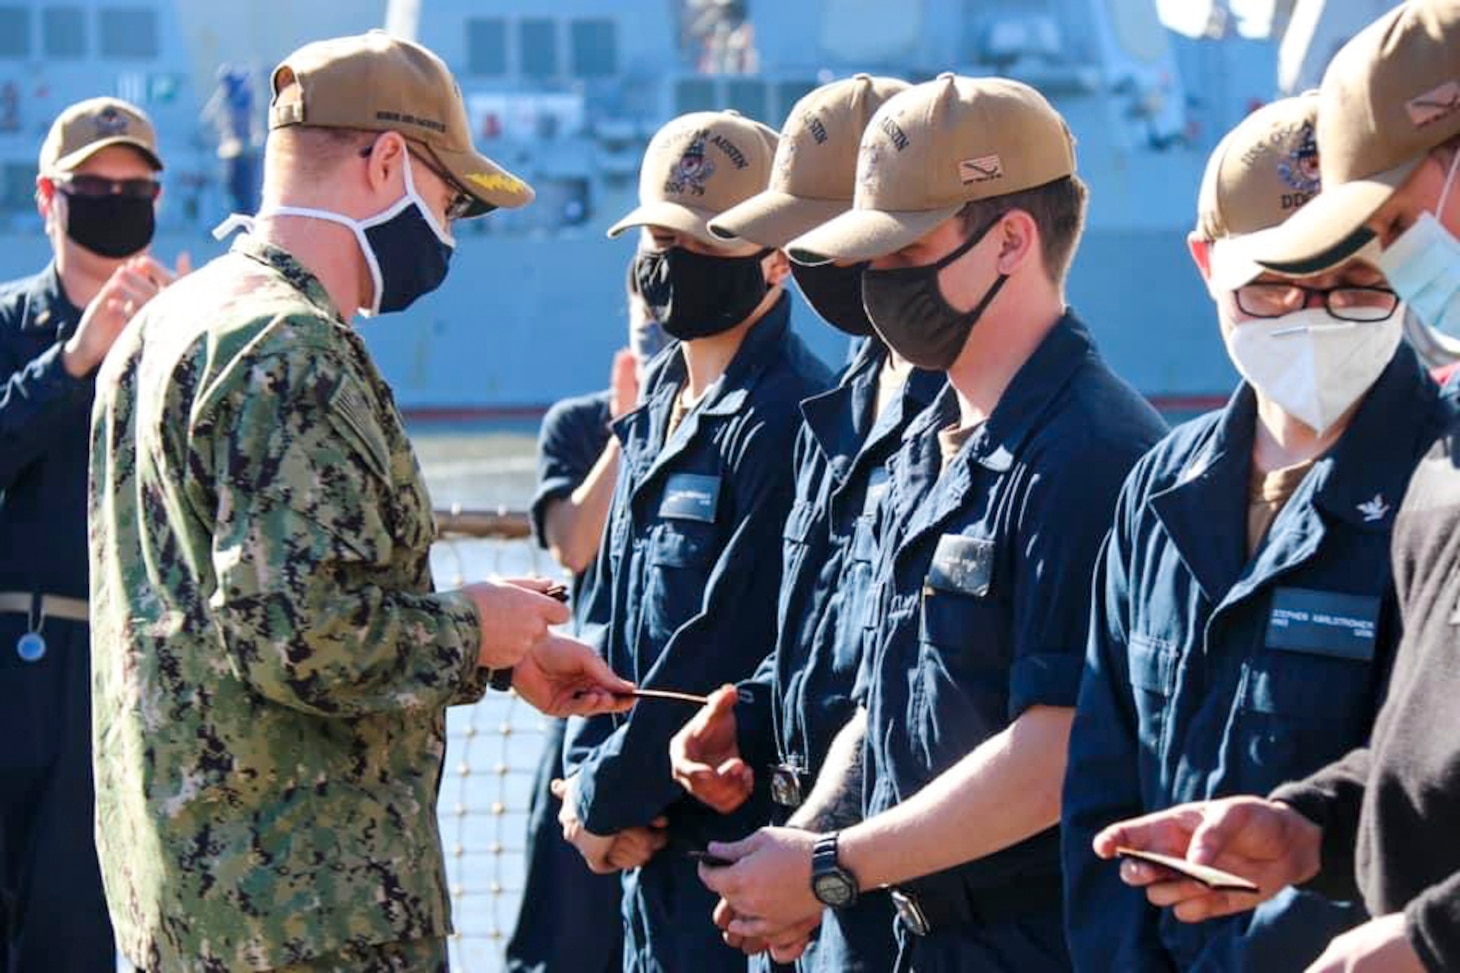 NAVAL STATION NORFOLK (April 15, 2021) -  Sailors aboard the Arleigh Burke-class, guided-missile destroyer USS Oscar Austin (DDG 79) receive their command patches during an all-hands call. Newly-reported Sailors undergo a series of evolutions and drills testing their knowledge following command indoctrination. The Sailors then receive their command patch at the completion of drills and evolutions. (U.S. Navy photo courtesy of USS Oscar Austin Public Affairs/Released)